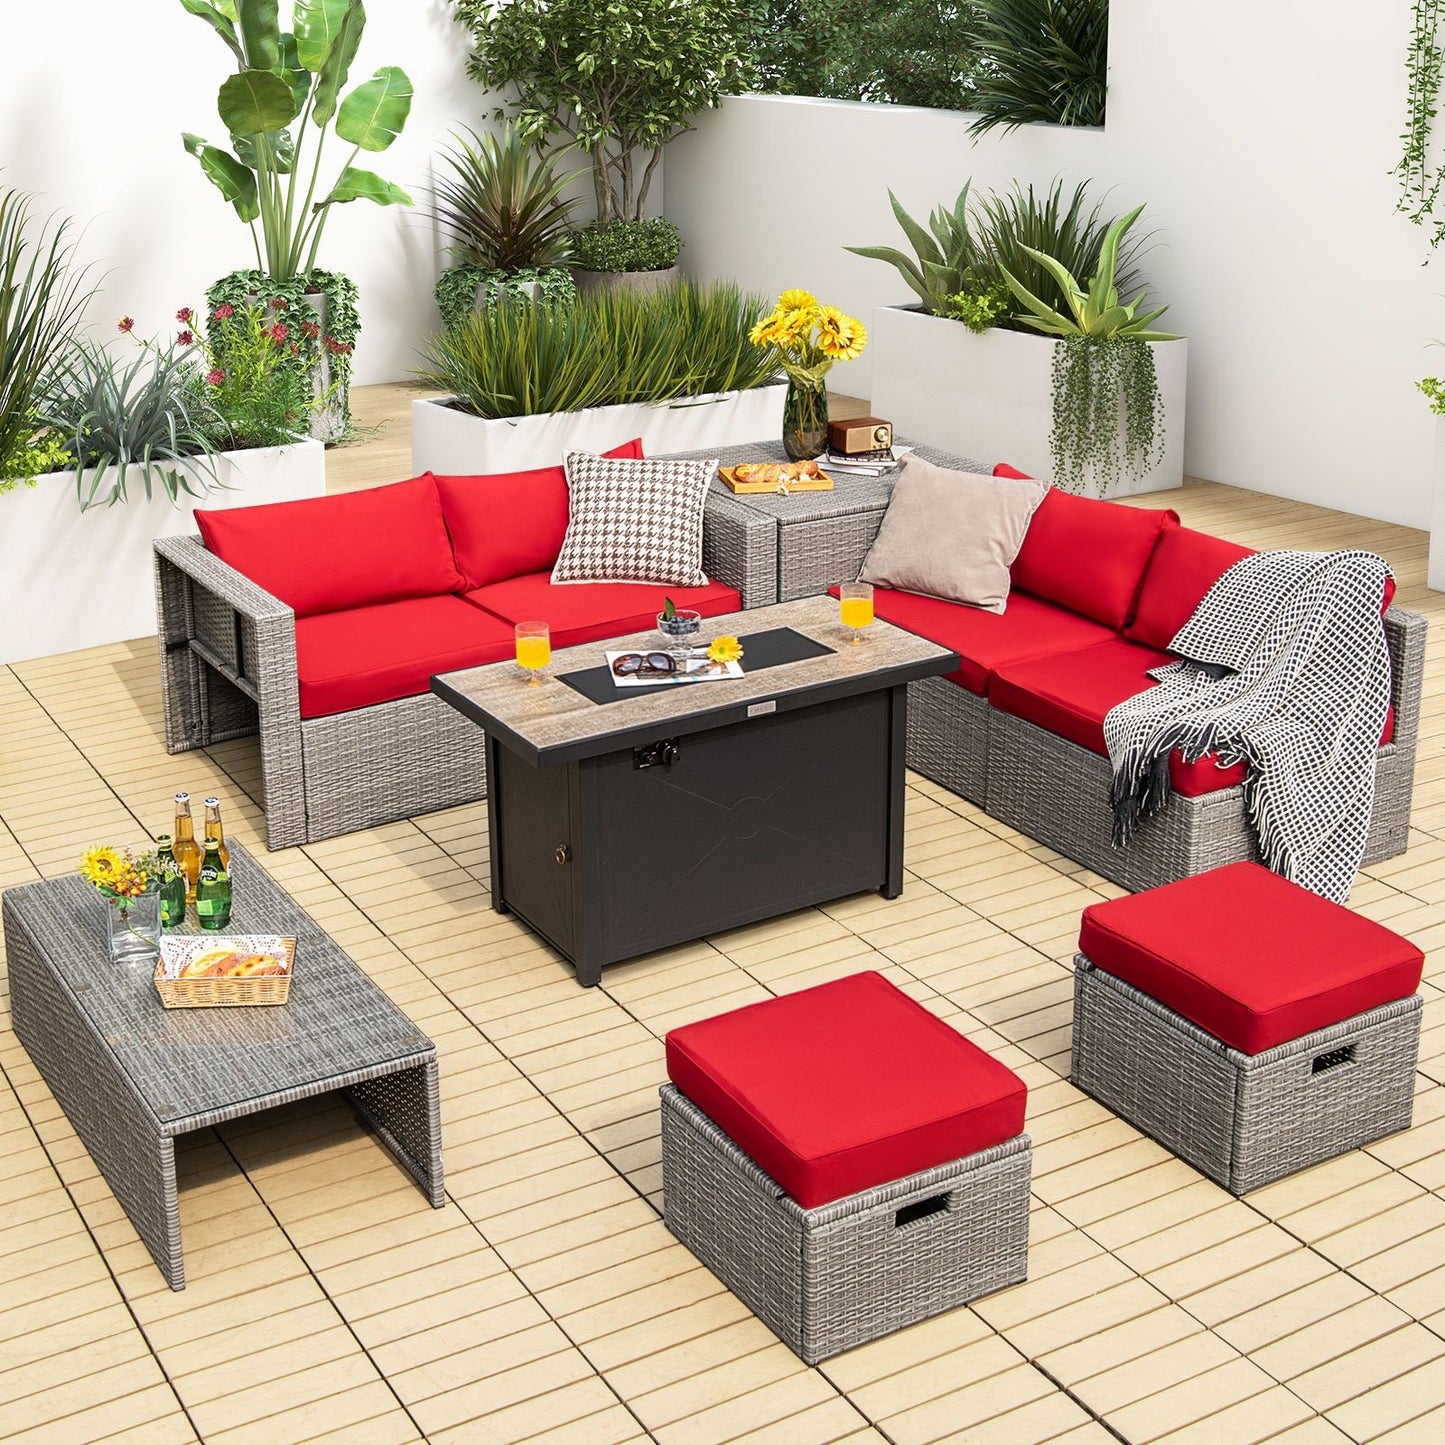 9 Pieces Patio Furniture Set with 42 Inches 60000 BTU Fire Pit, Red